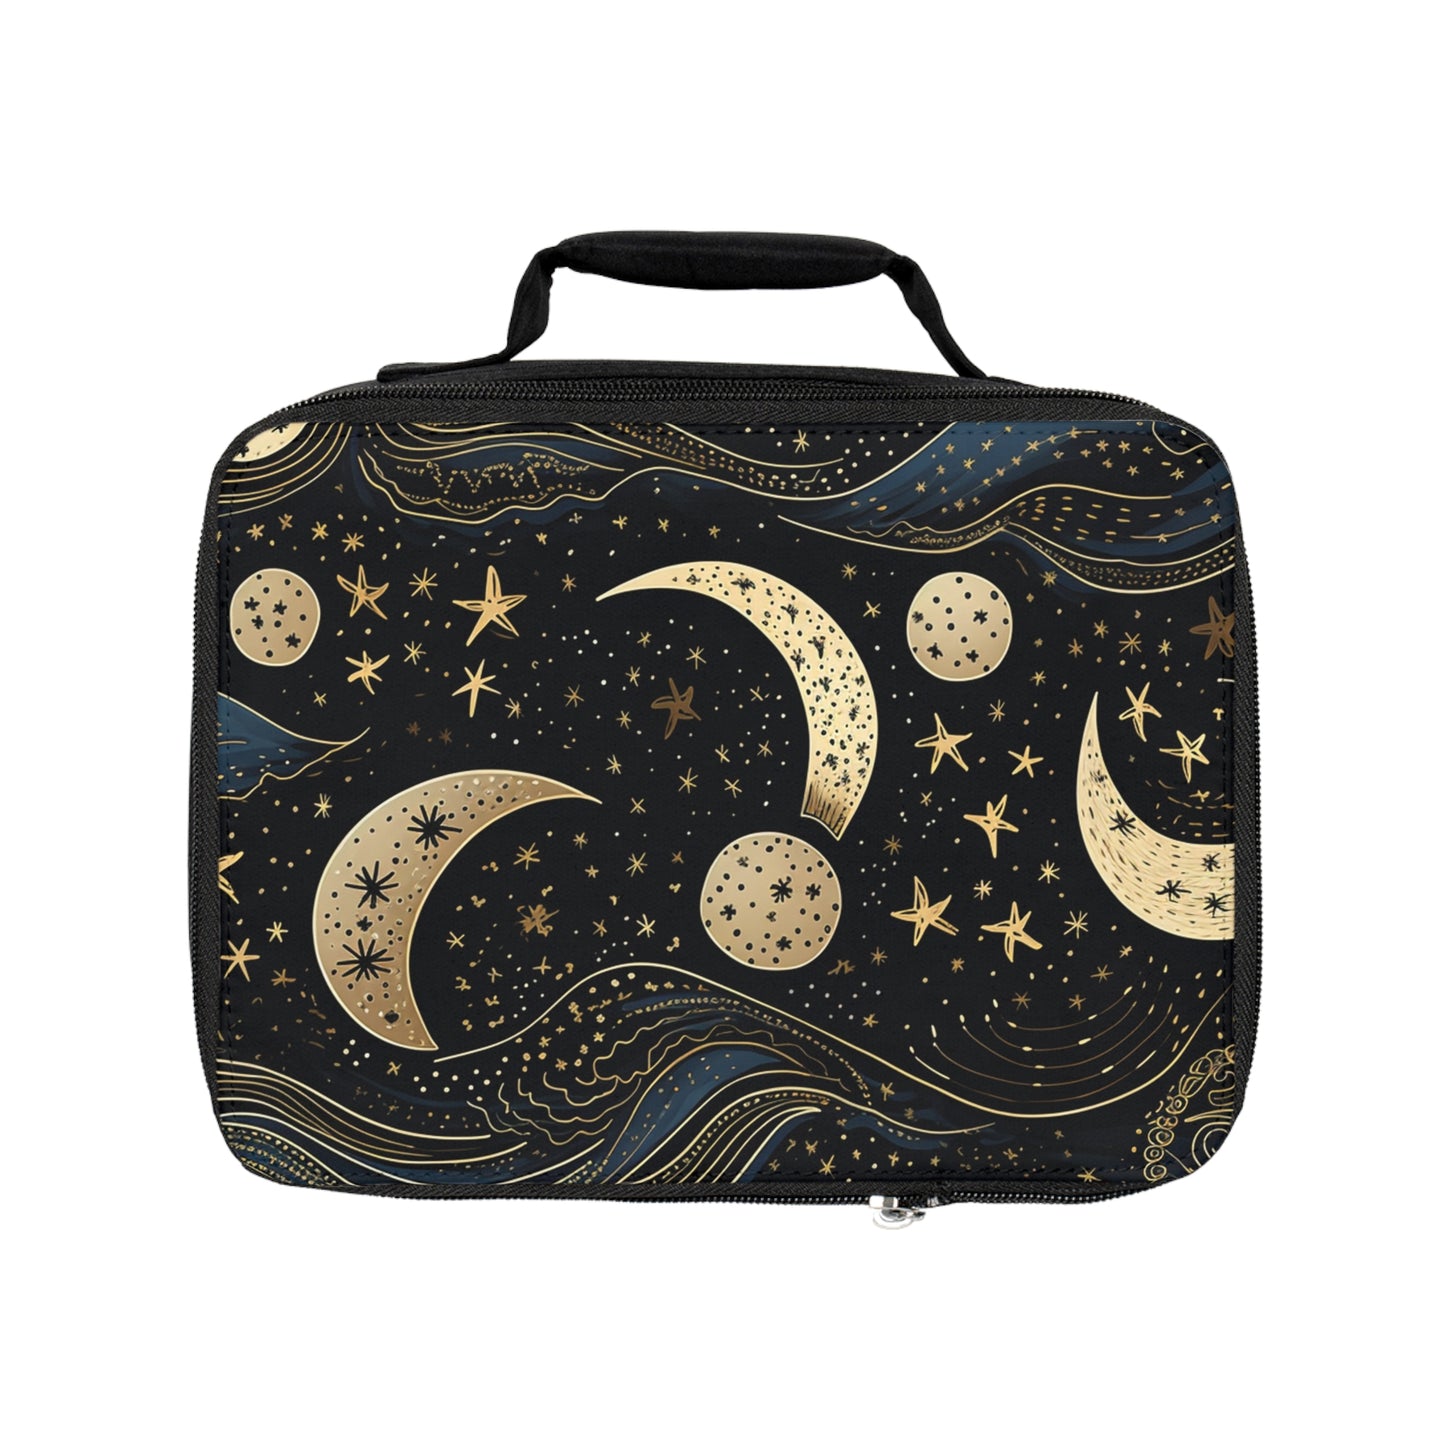 Celestial Moon Abstract Zipper Lunch Bag | Cosmic Themed, Starry Accessories